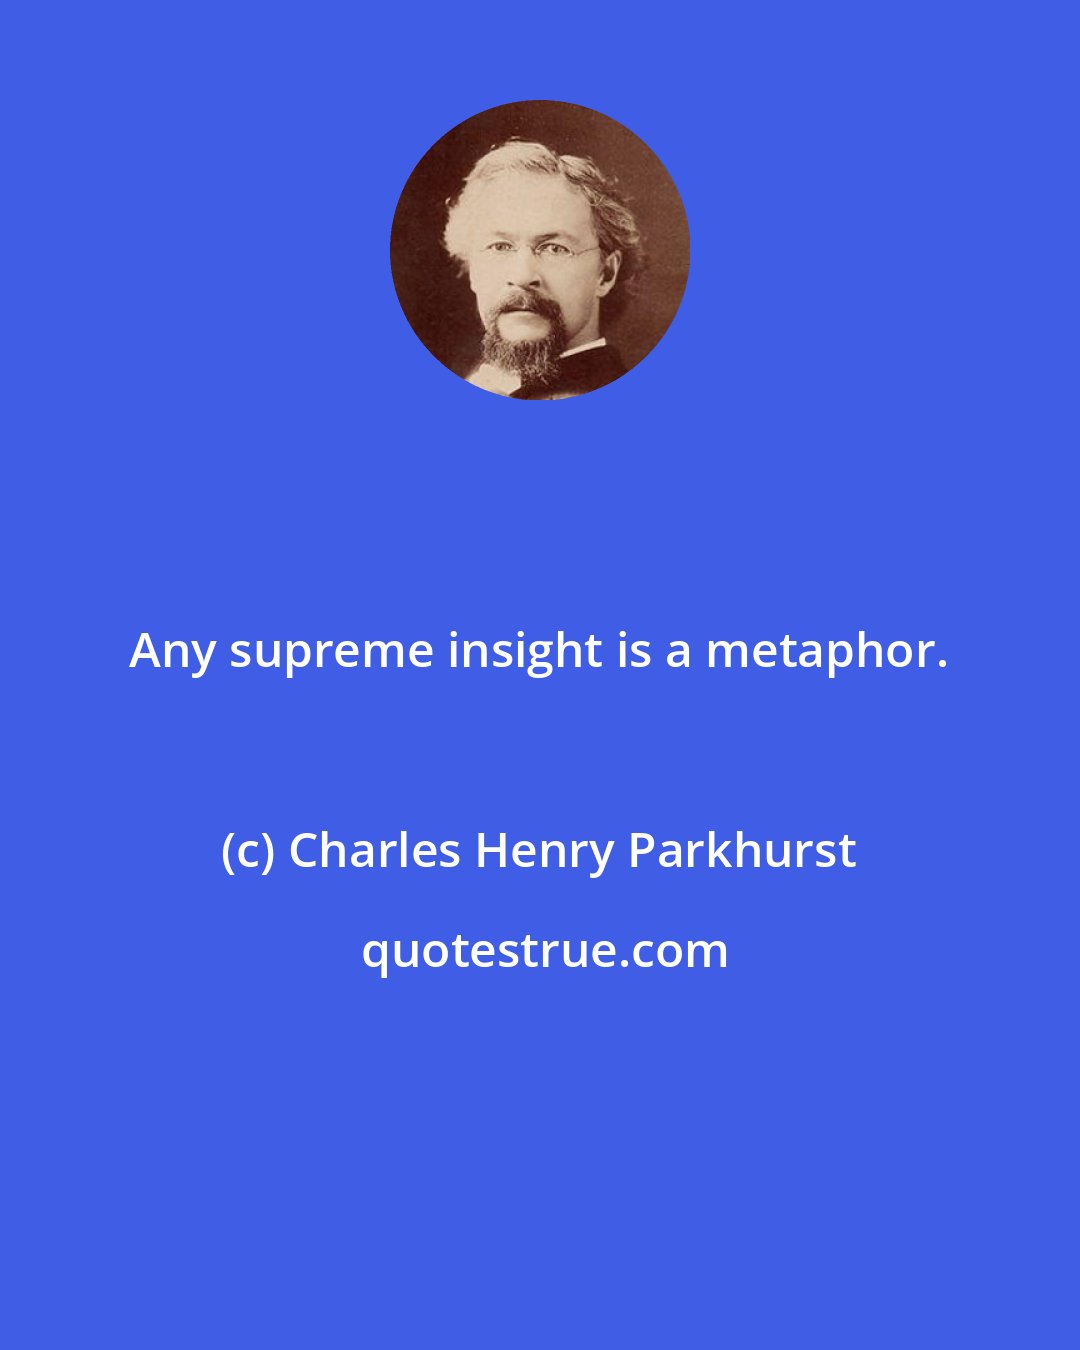 Charles Henry Parkhurst: Any supreme insight is a metaphor.